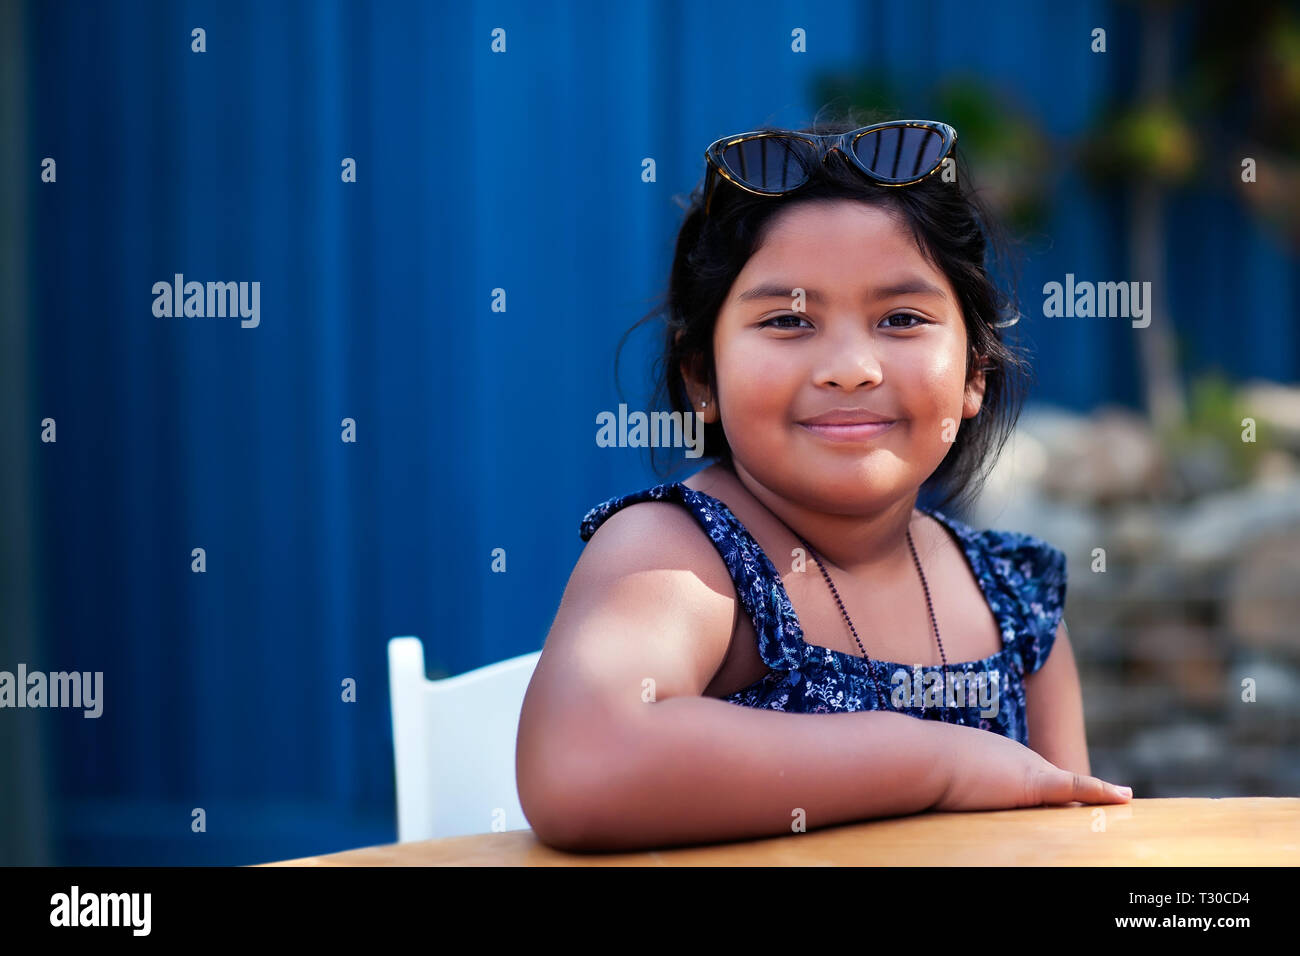 Portrait of a friendly little girl wearing shades and modest clothing while sitting and smiling in an outdoor setting. Stock Photo